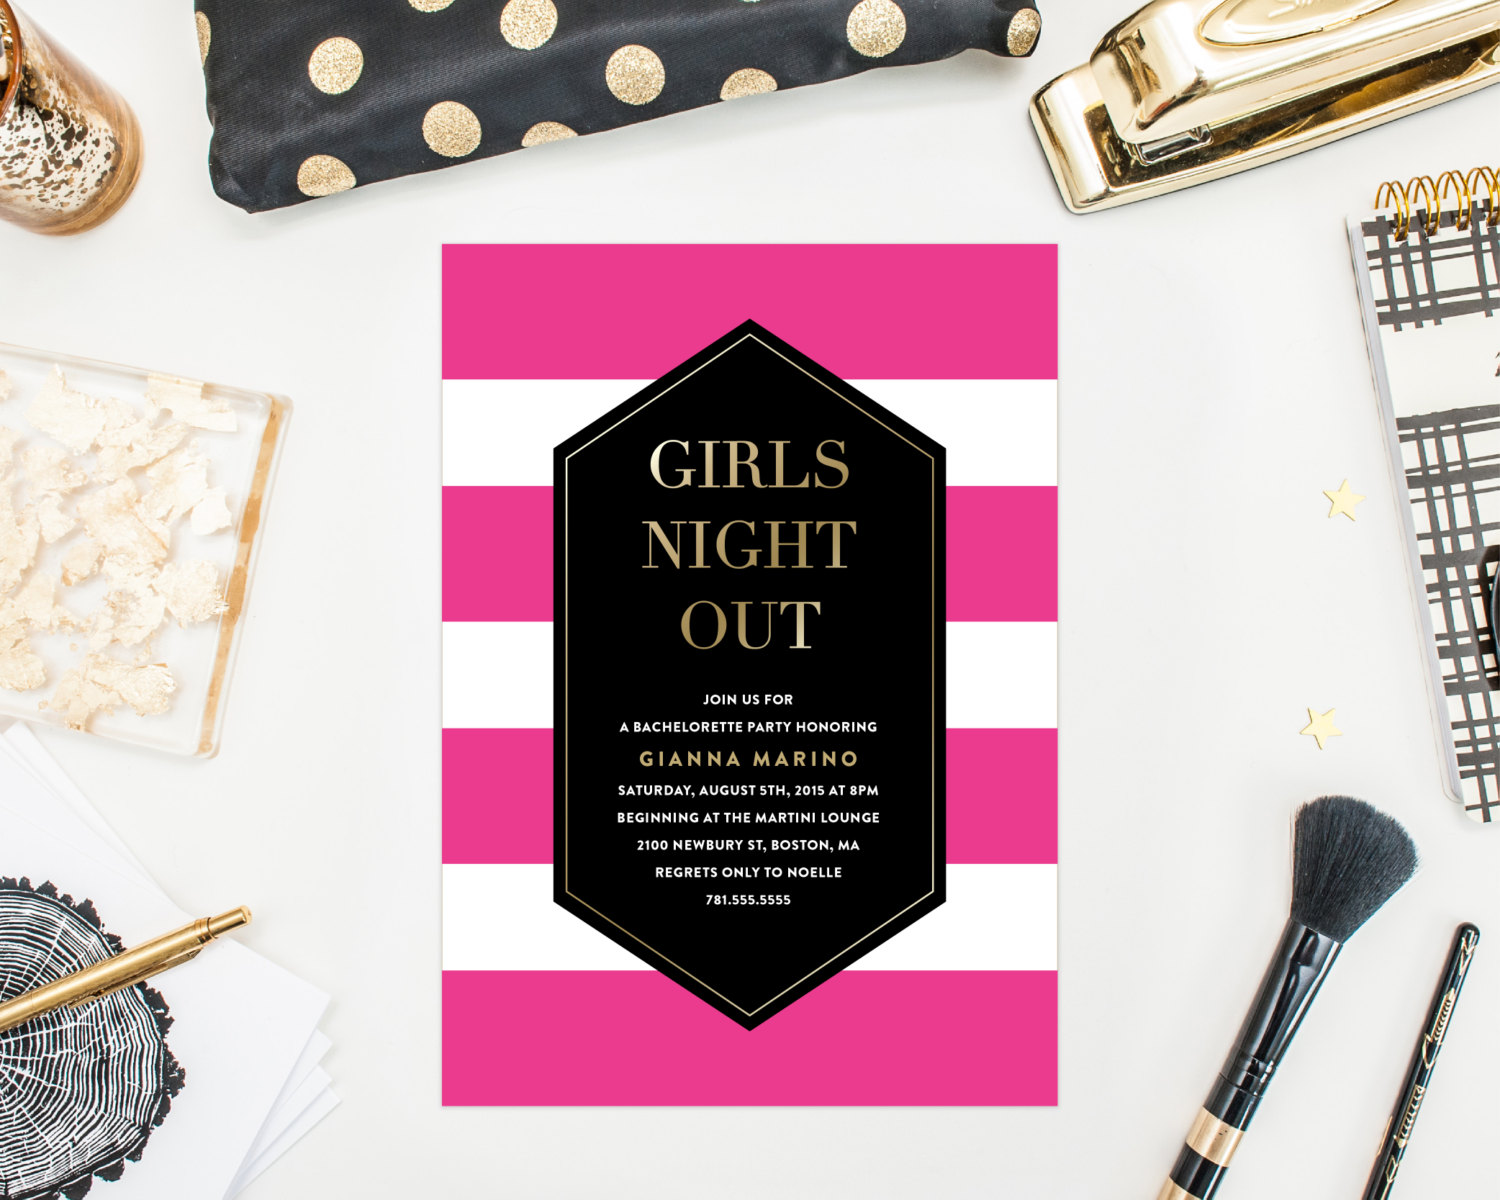 girls night out bachelorette party invitation by fine and dandy paperie | fun bachelorette party ideas | https://emmalinebride.com/planning/fun-bachelorette-party-ideas/